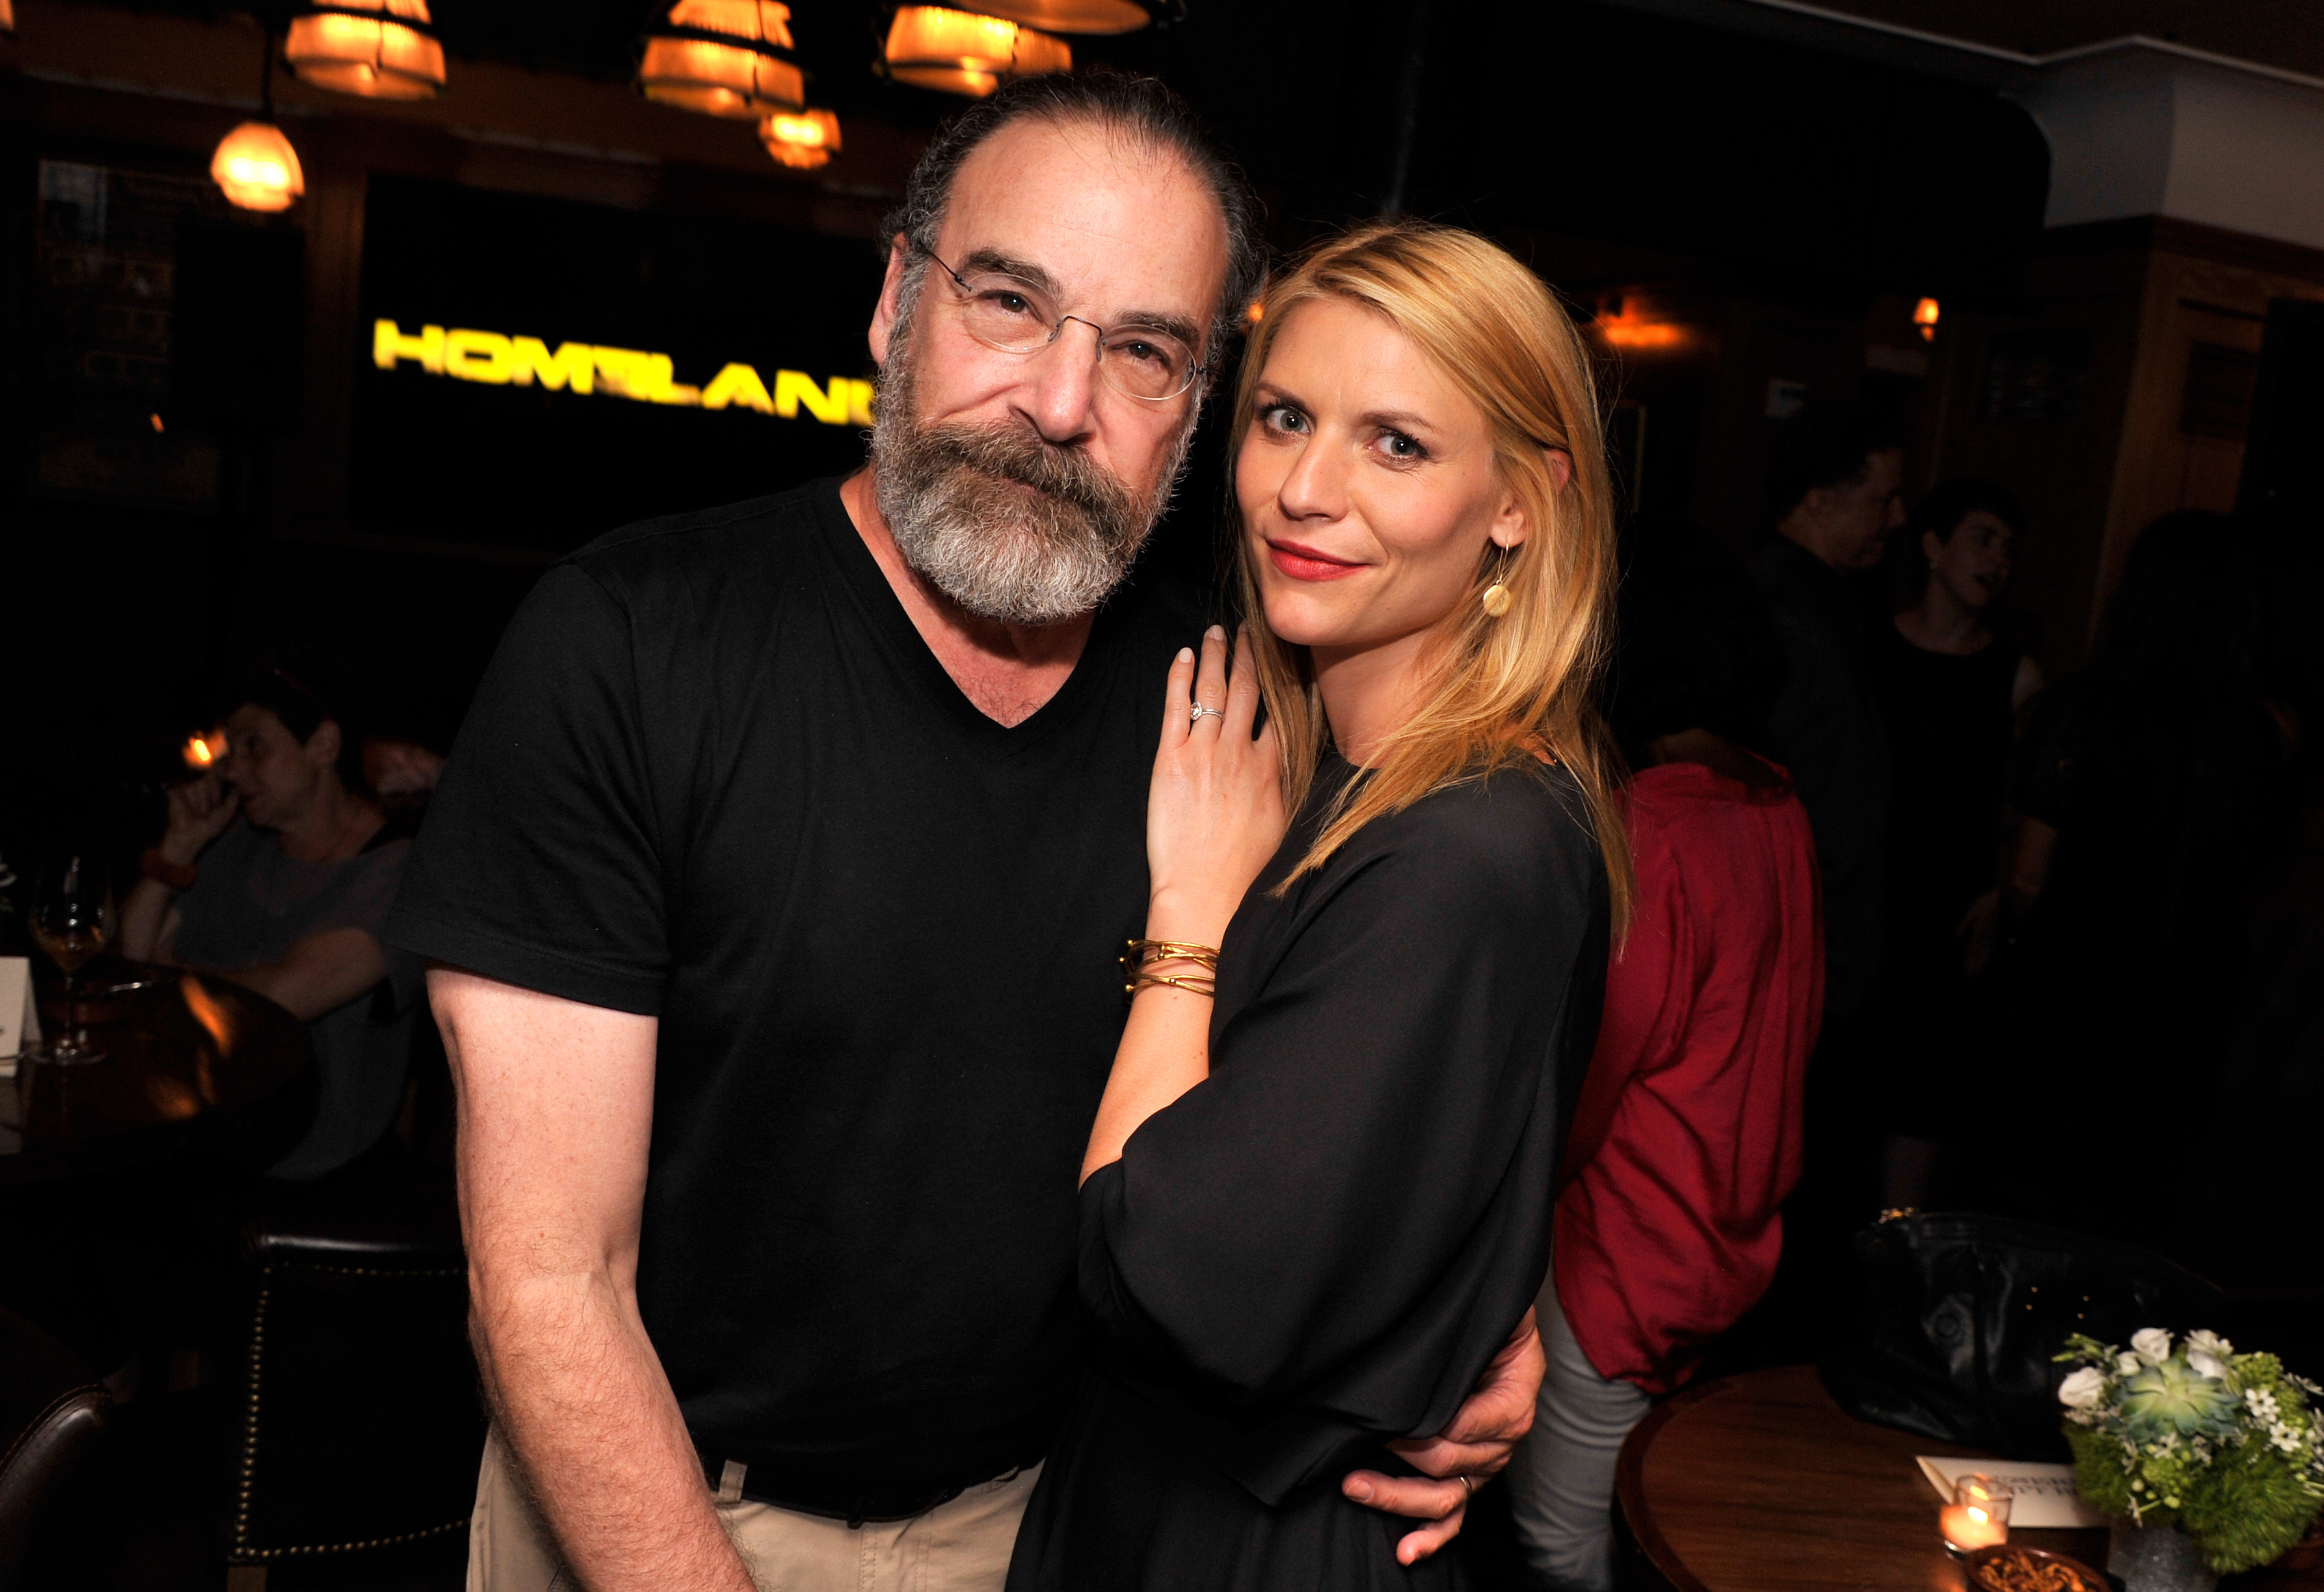 Actors Mandy Patinkin and Claire Danes attend a Private Reception And Screening Of Homeland Season 4 on September 4, 2014 in New York City. (Stephen Lovekin&mdash;Getty Images for Showtime)